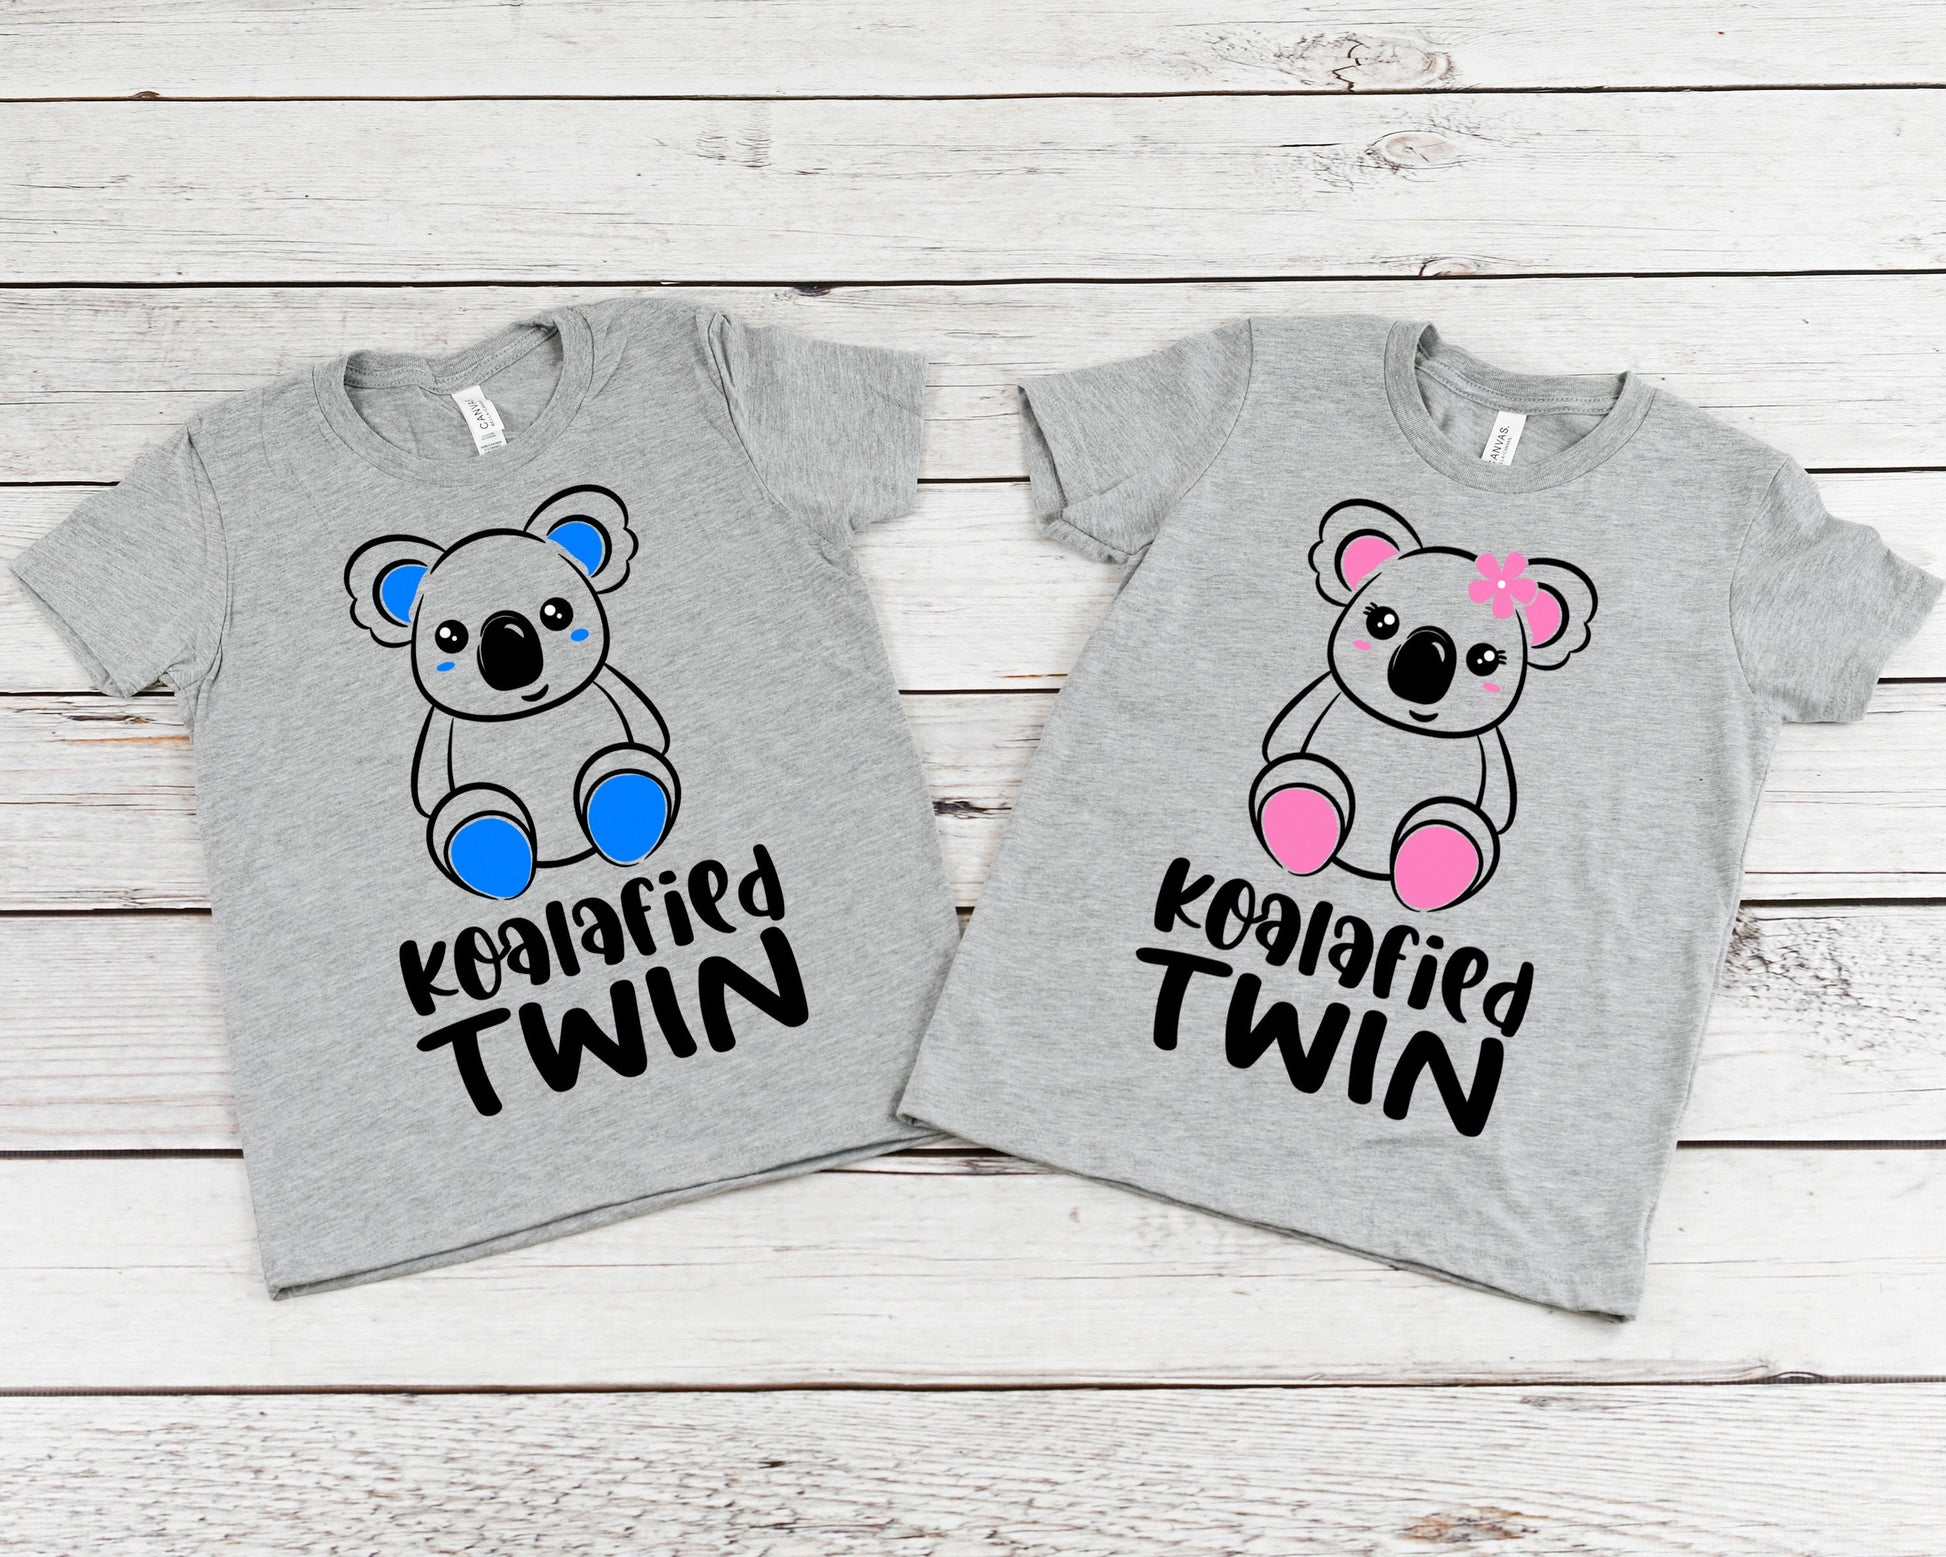 Koalafied Twin Boy Girl Twin T-Shirts or Bodysuits - Gift for Twins - Fraternal Twins - Matching Brother Sister Shirts - Twin Shirts